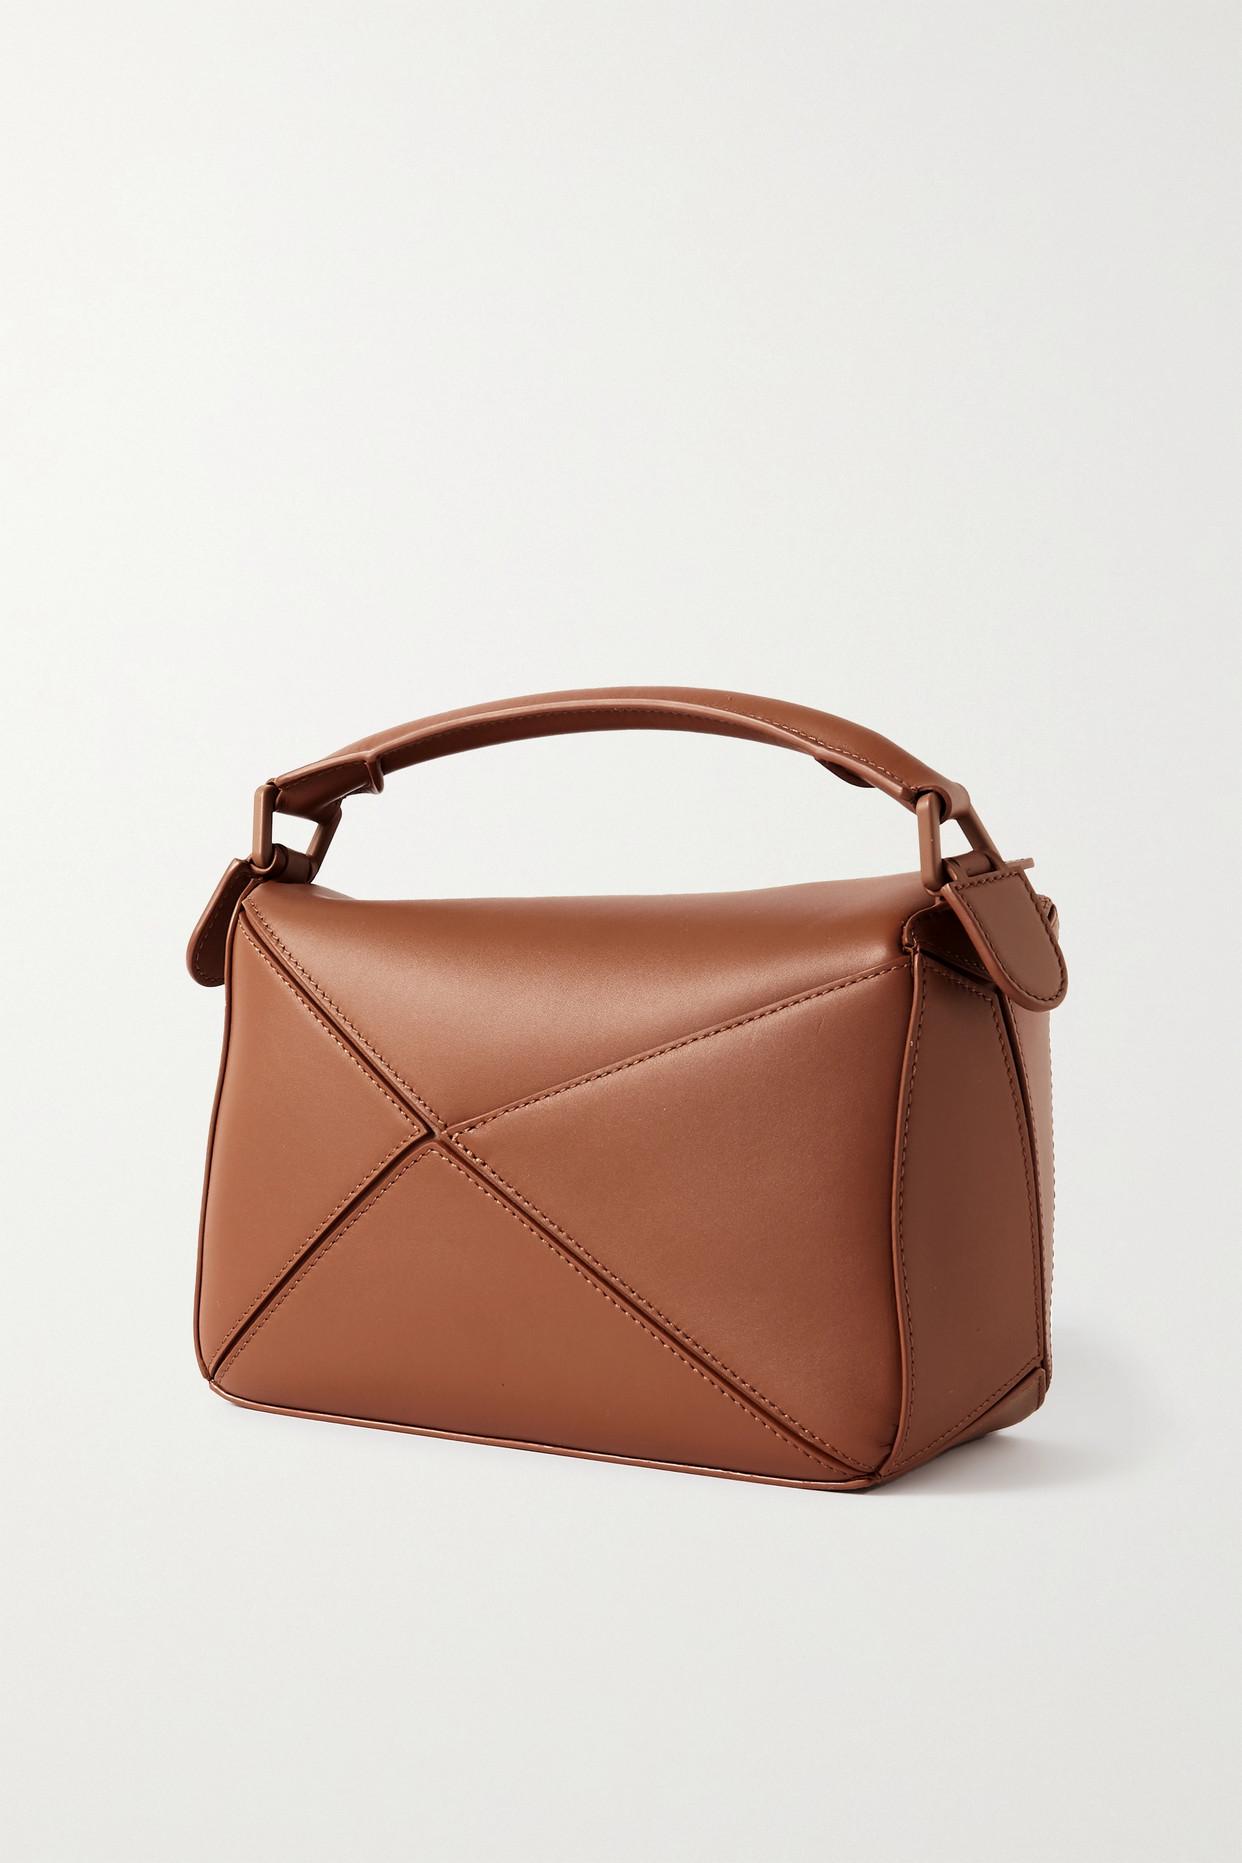 LOEWE Puzzle small leather shoulder bag